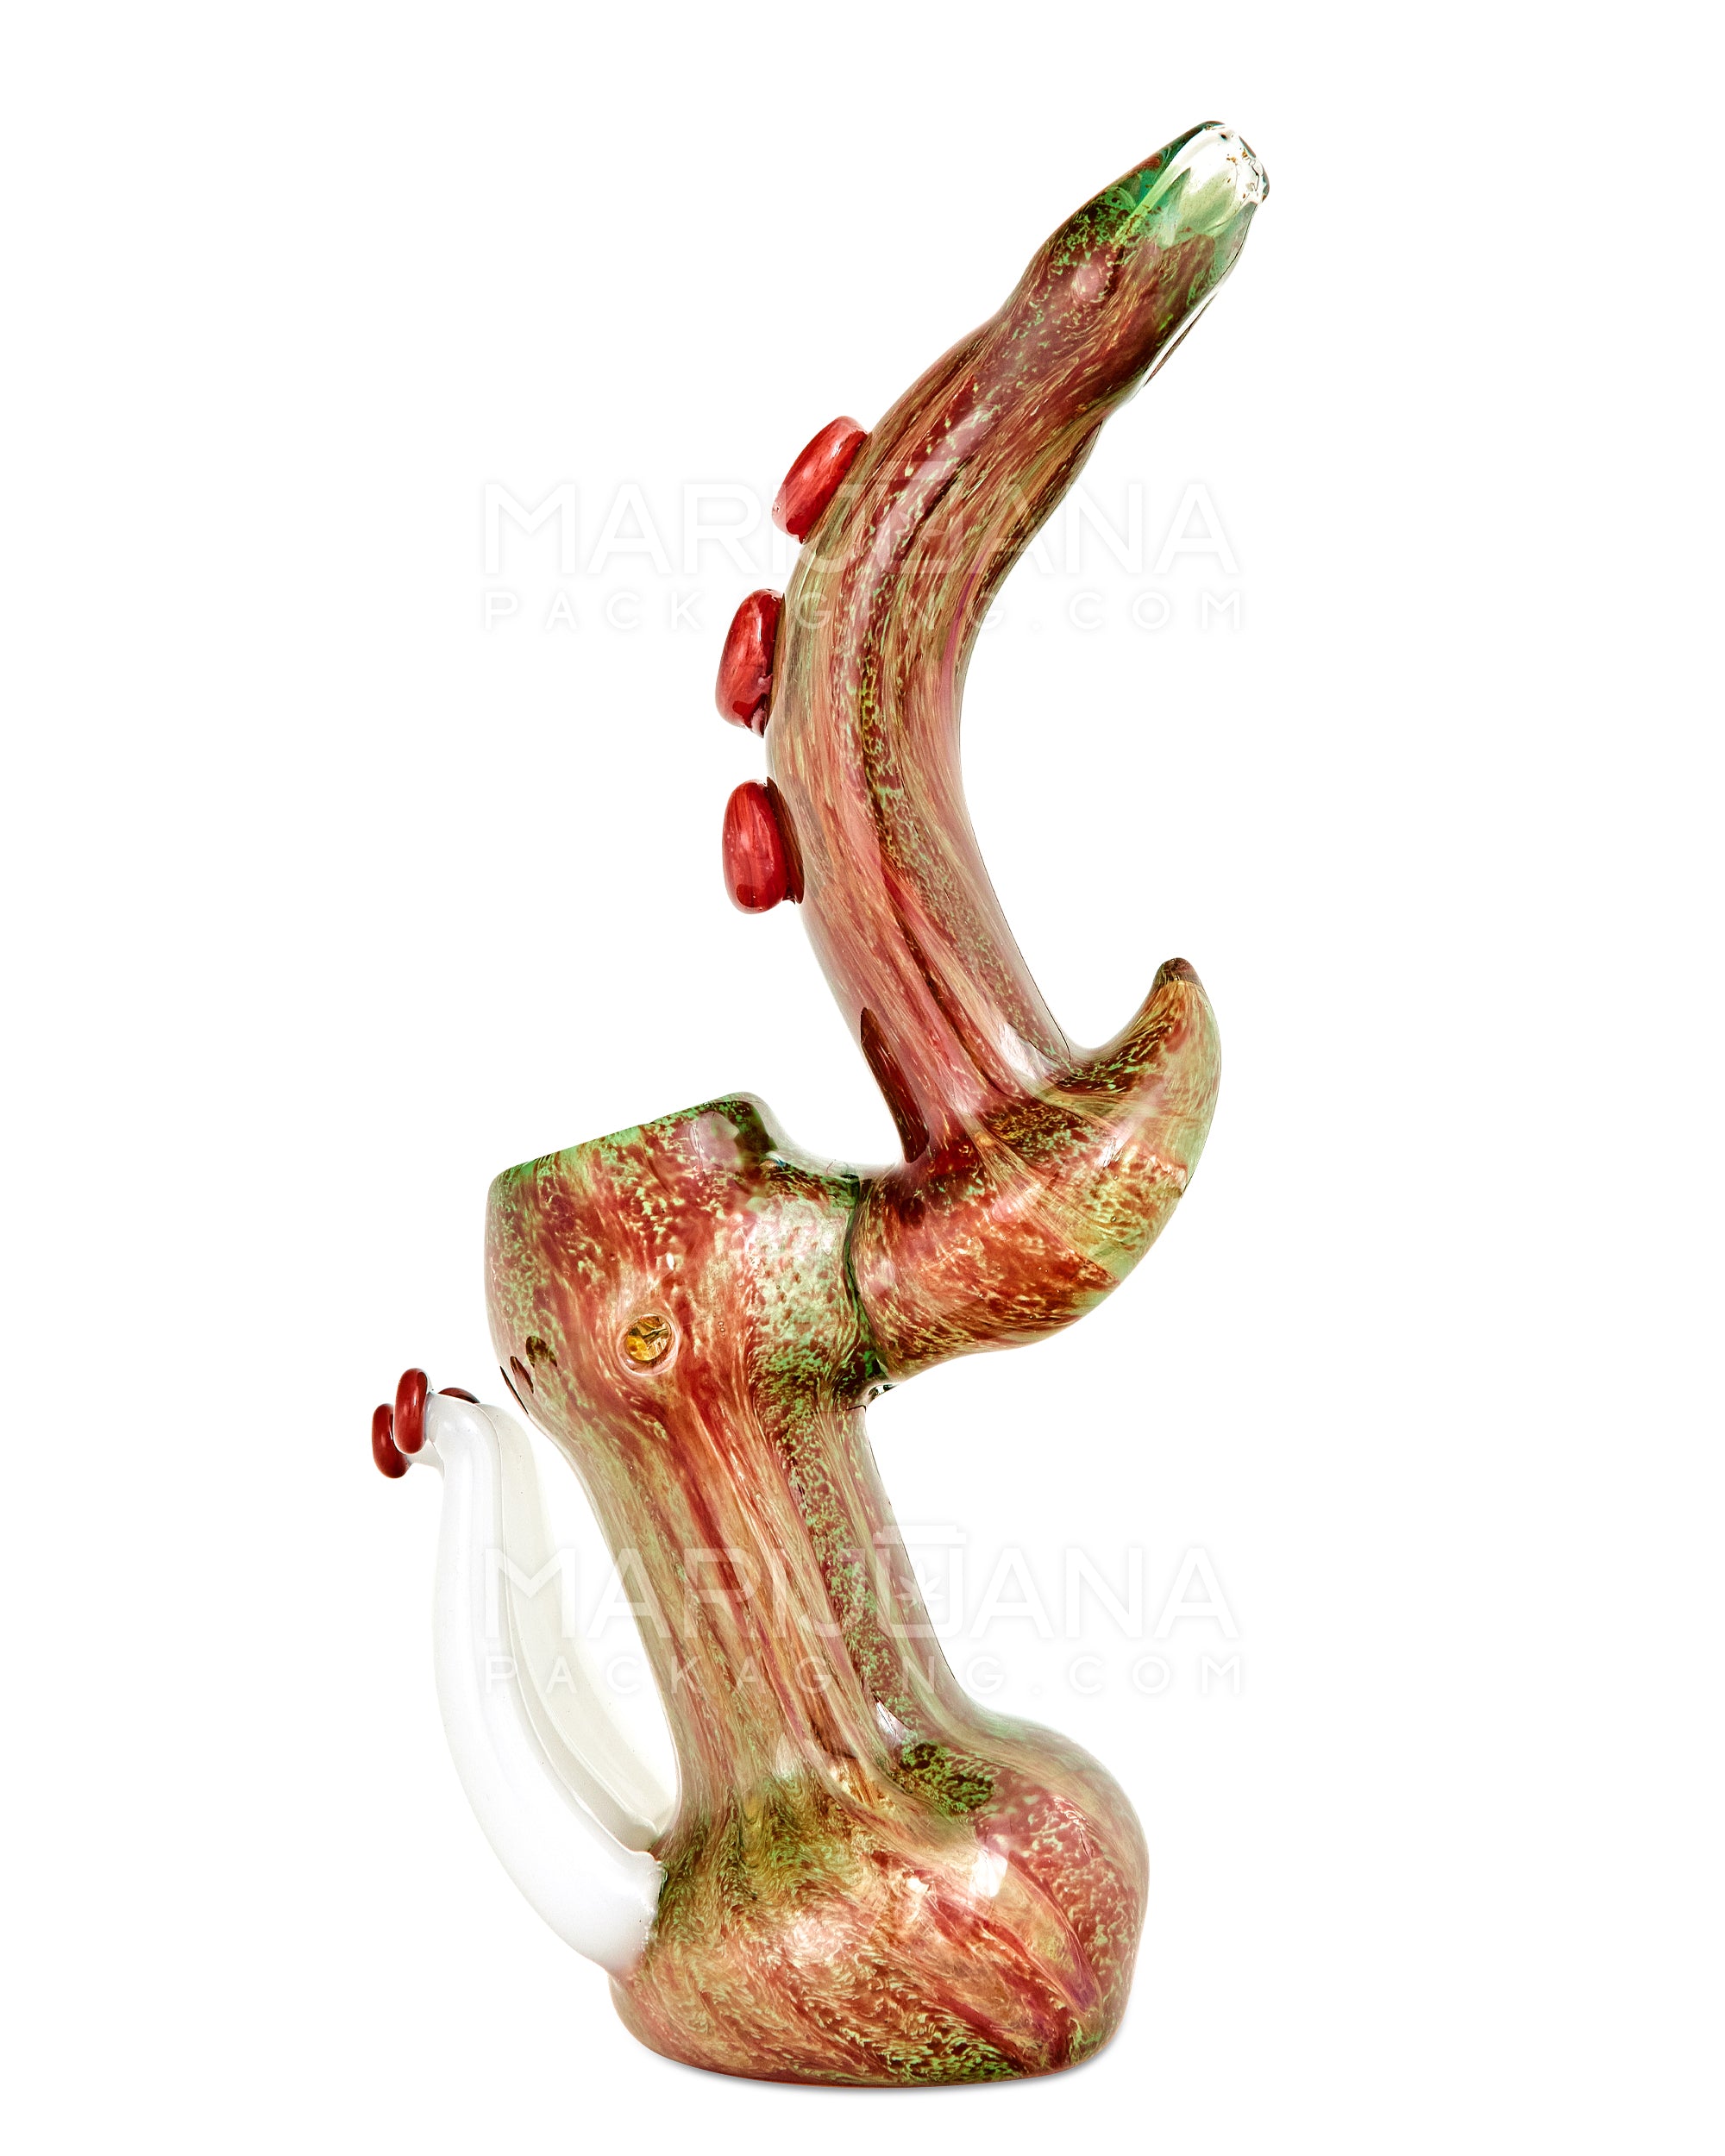 Heady | Donut Mouth Color Pull Kraken Bubbler w/ Triple Tentacles | 9in Tall - Glass - Red & Green - 5